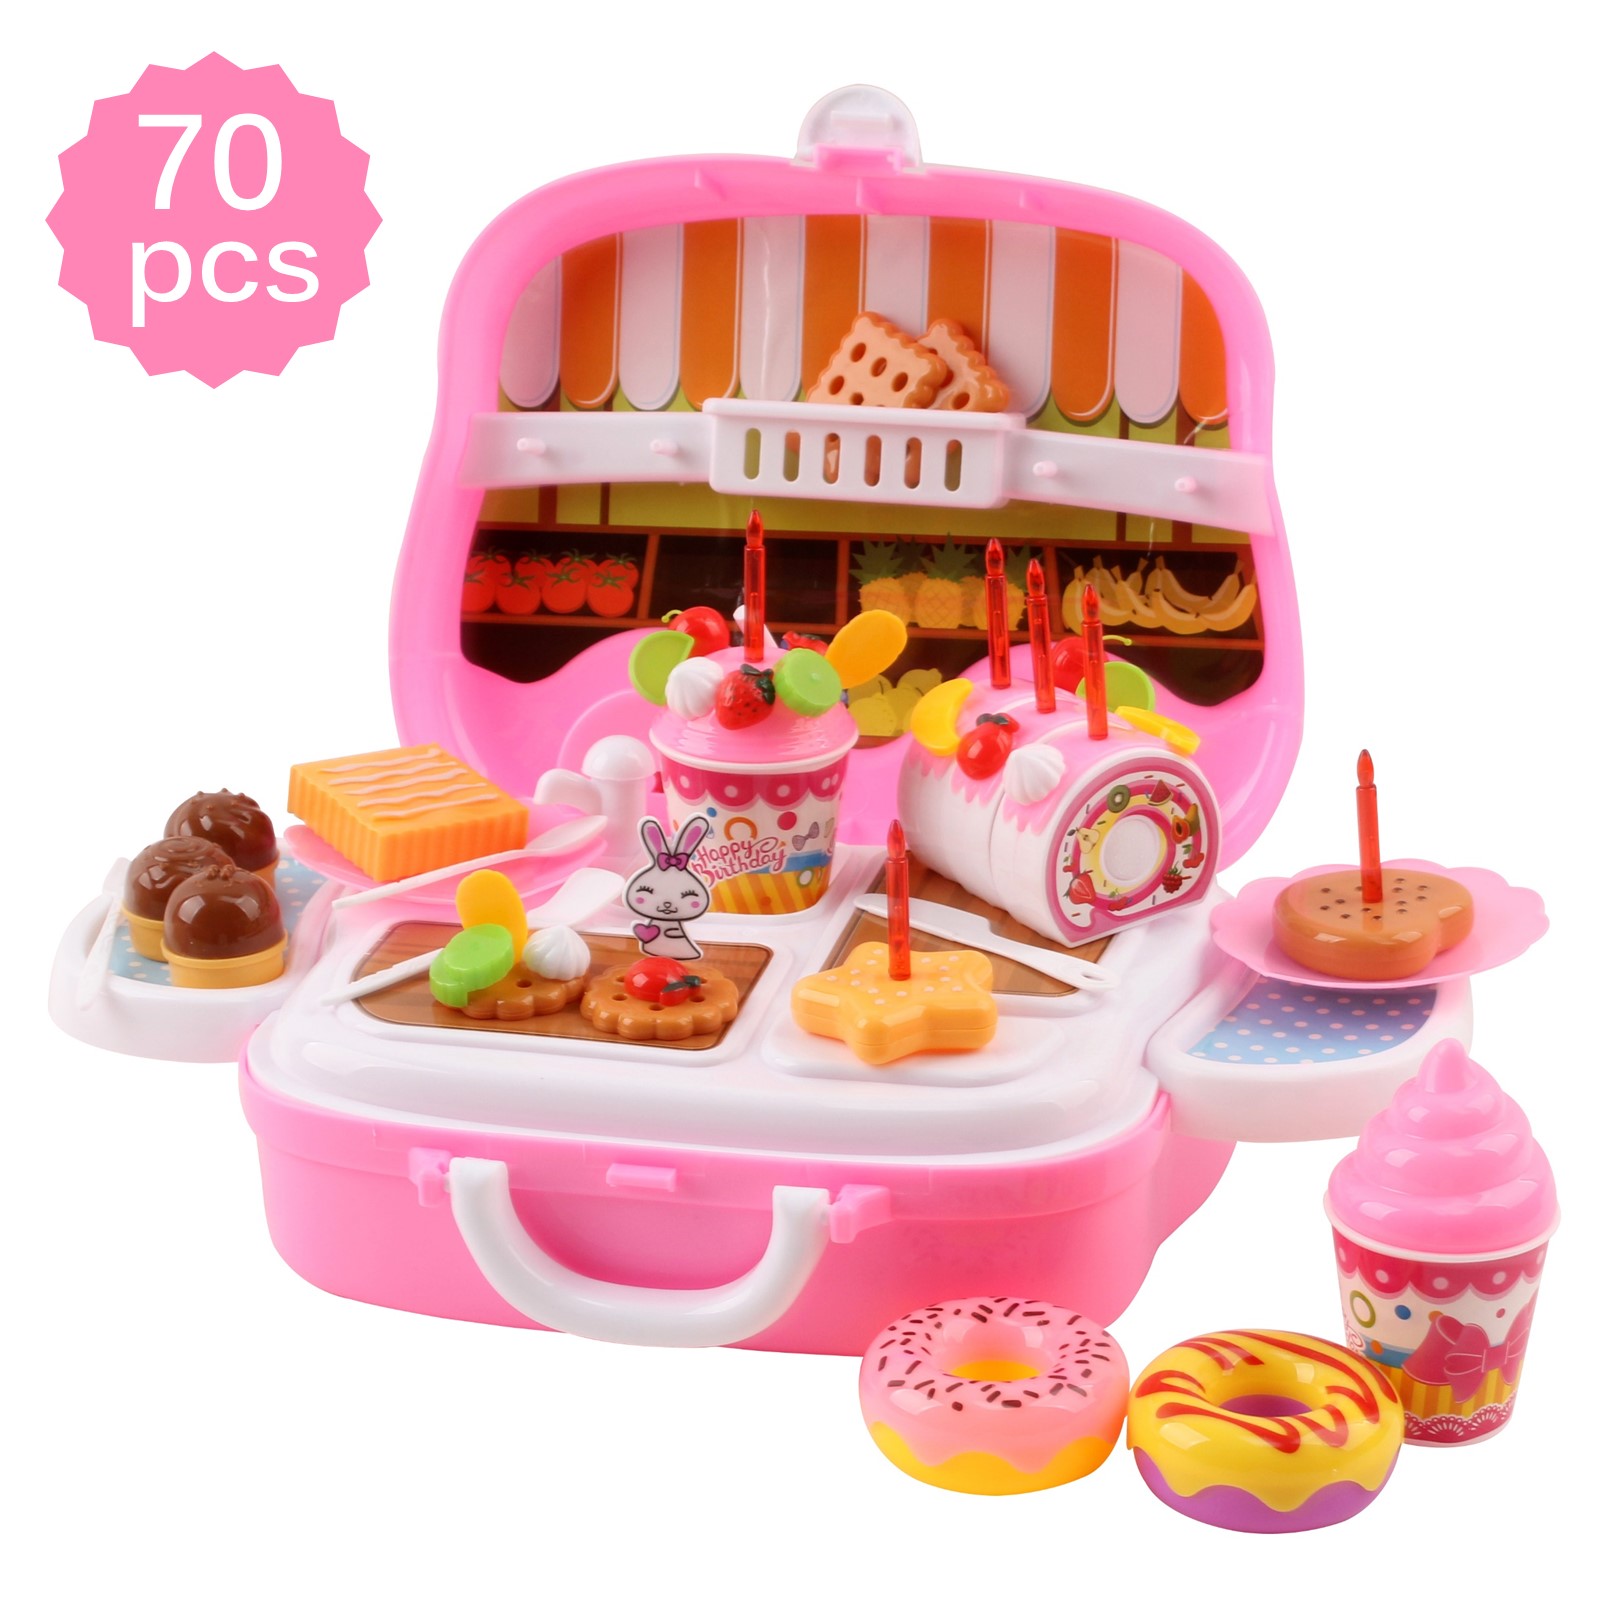 39 Pieces Large Portable Dessert Stand Birthday Cake Ice Cream Cart Candy Trolley Kitchen With Lights Music Candles Food Toys 3 feet tall Children's Party Pretend Play Truck Folds Up in Suitcase Playset Appliance Set Pieces